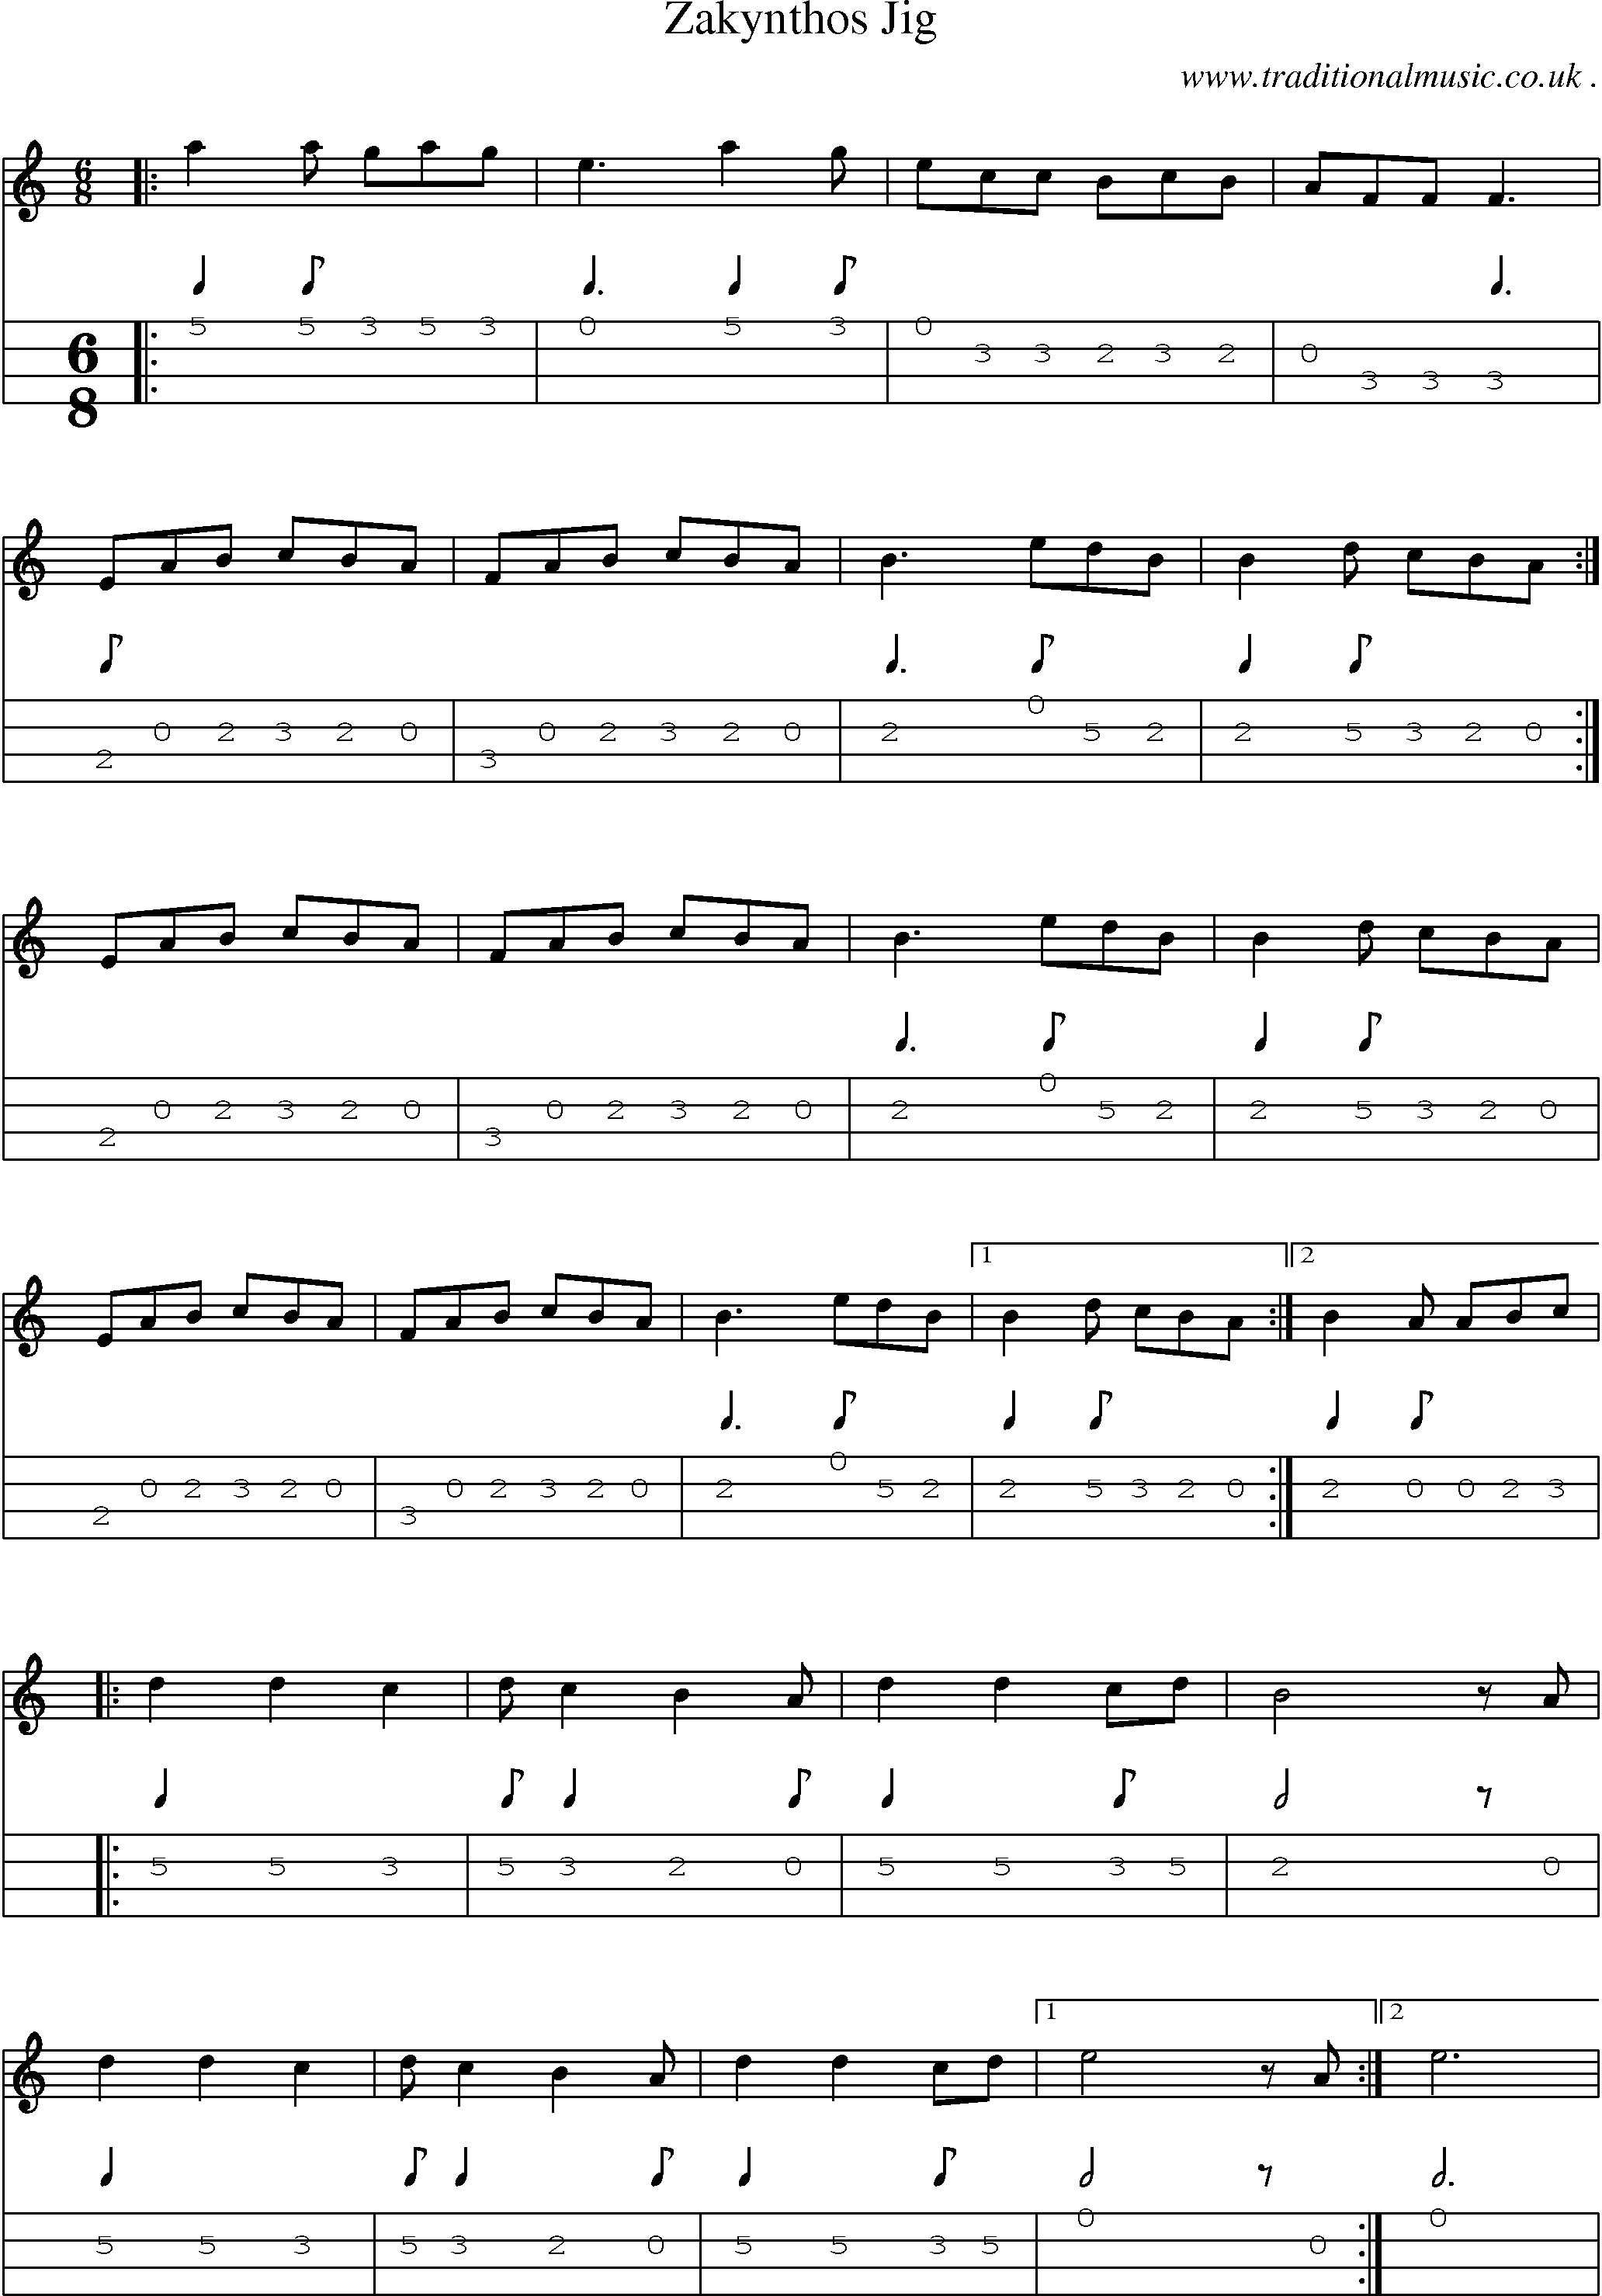 Music Score and Guitar Tabs for Zakynthos Jig